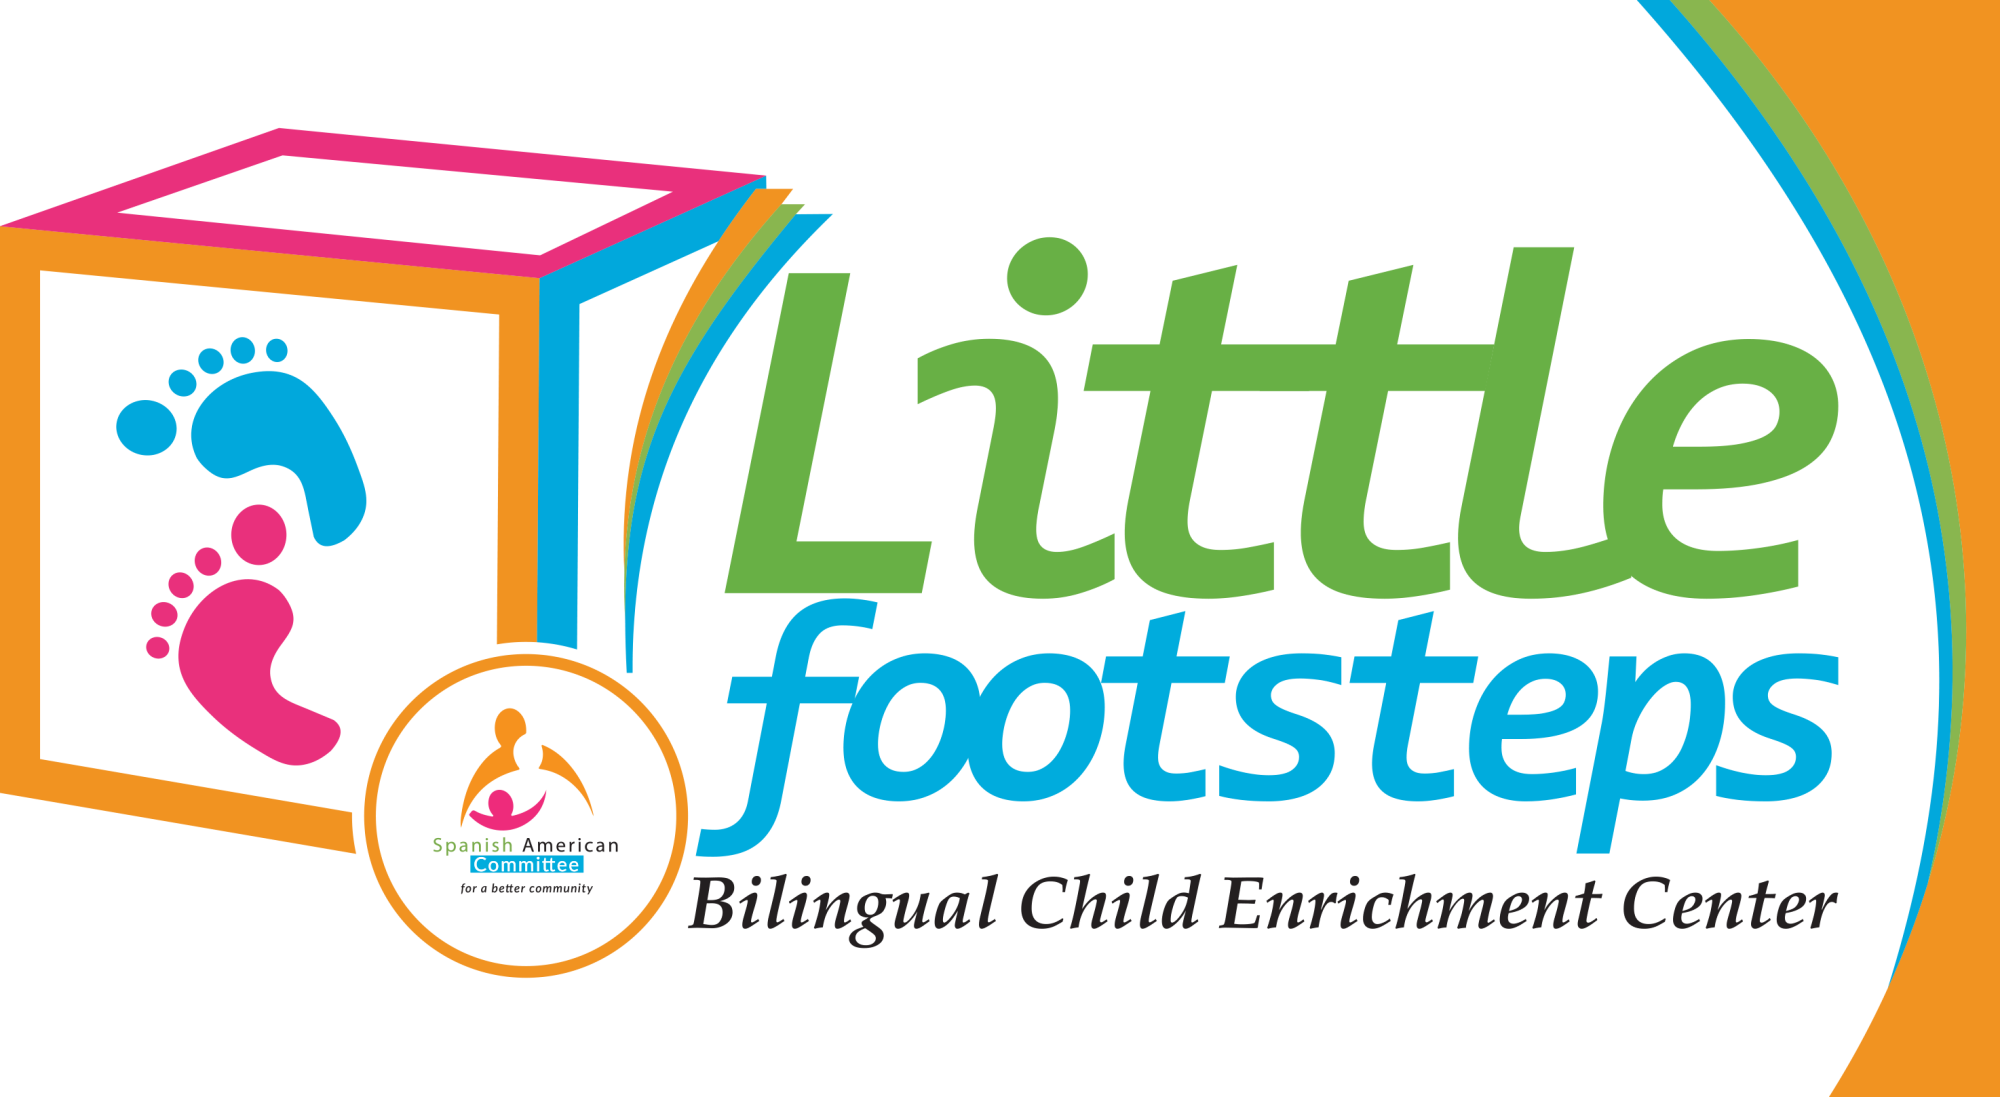 Logo for the Spanish American Committee's Little Footsteps bilingual child care center